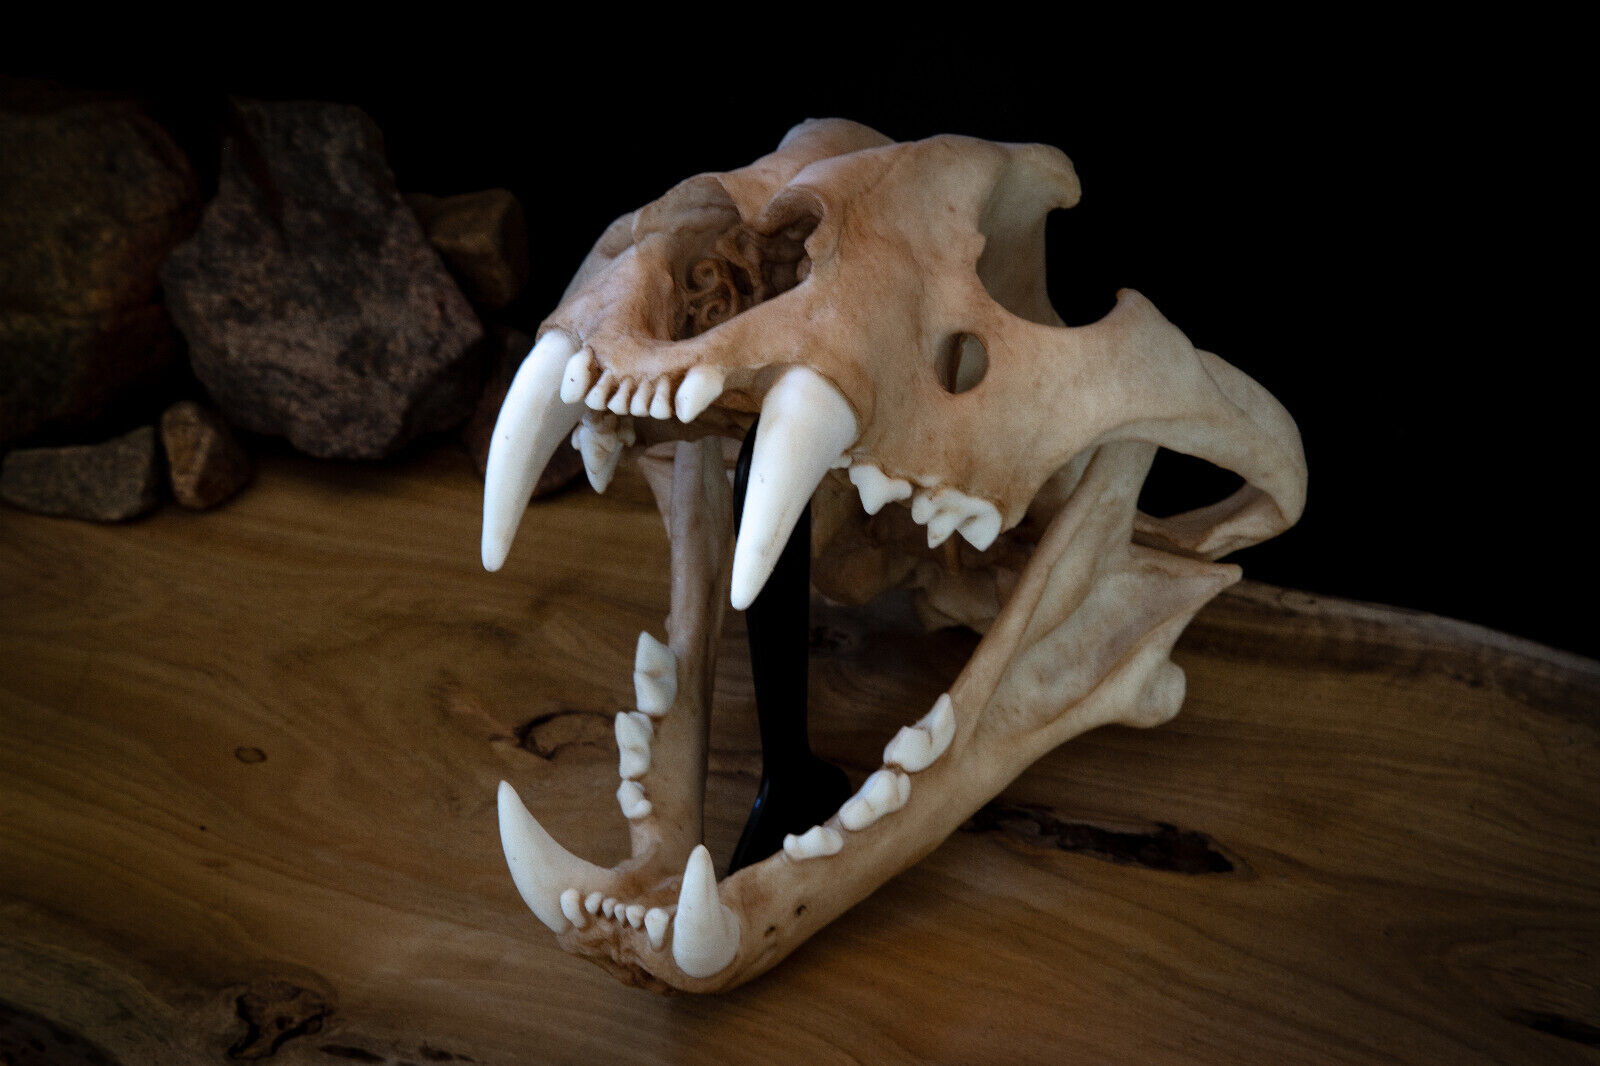 High Quality Tiger Skull -Large Adult -Quality Replica -FREE world wide shipping